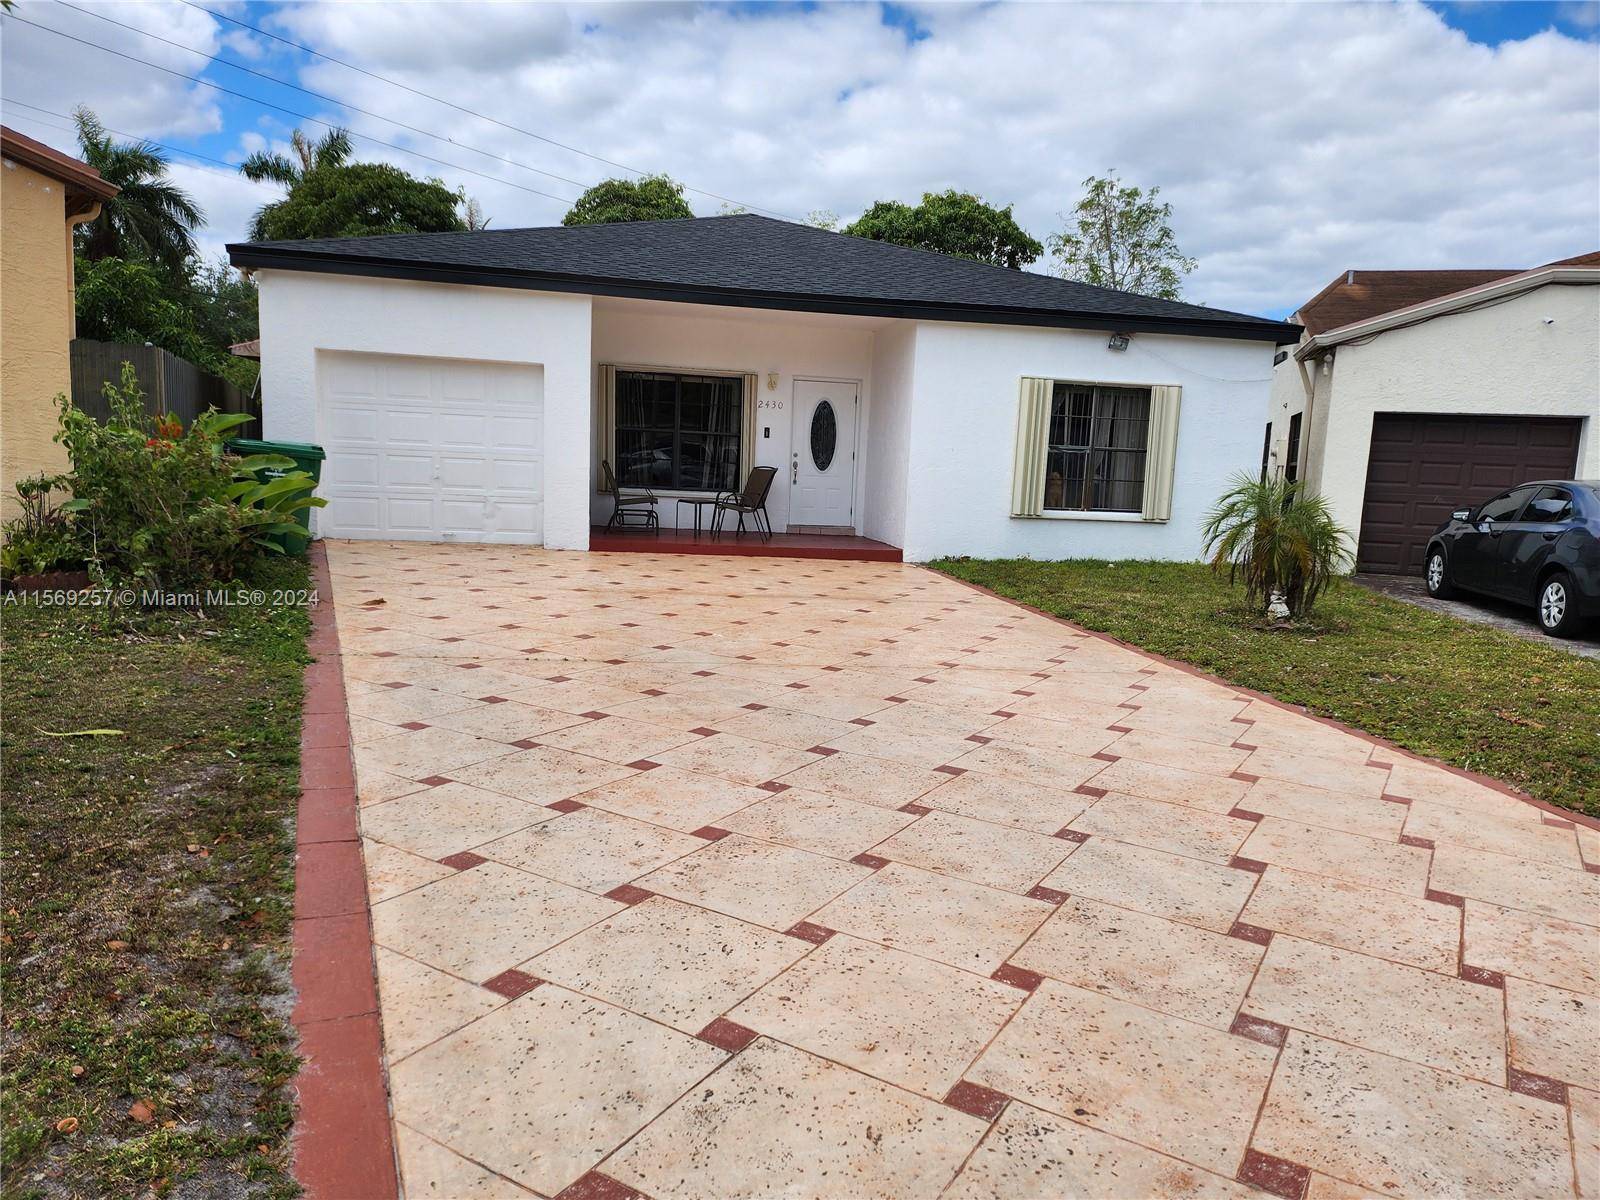 Beautiful Single Family House with 4 bedrooms and 3 bathrooms, one of the rooms has an independent entrance, new roof, large backyard with mango and avocado trees, Large driveway for ...